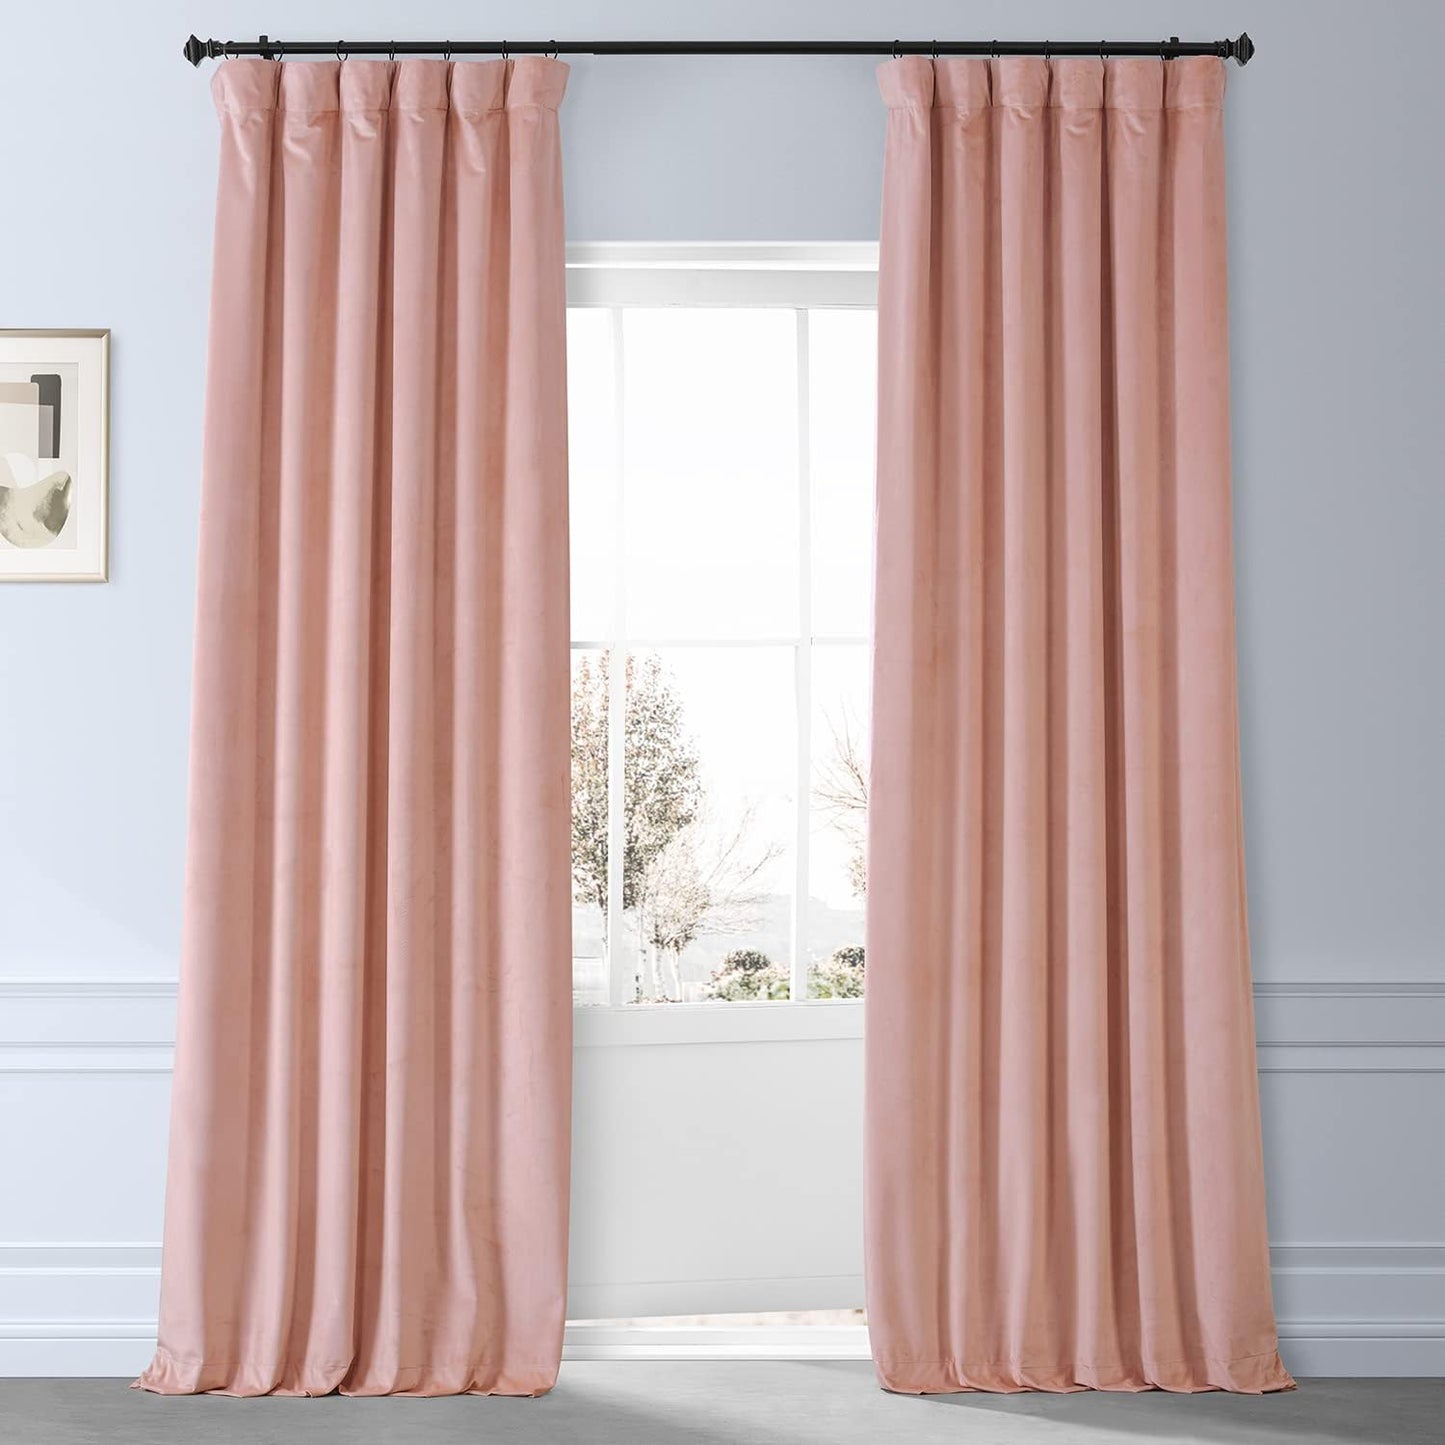 HPD HALF PRICE DRAPES Blackout Solid Thermal Insulated Window Curtain 50 X 96 Signature Plush Velvet Curtains for Bedroom & Living Room (1 Panel), VPYC-SBO198593-96, Diva Cream  Exclusive Fabrics & Furnishings Apricot Blossom 50 X 108 